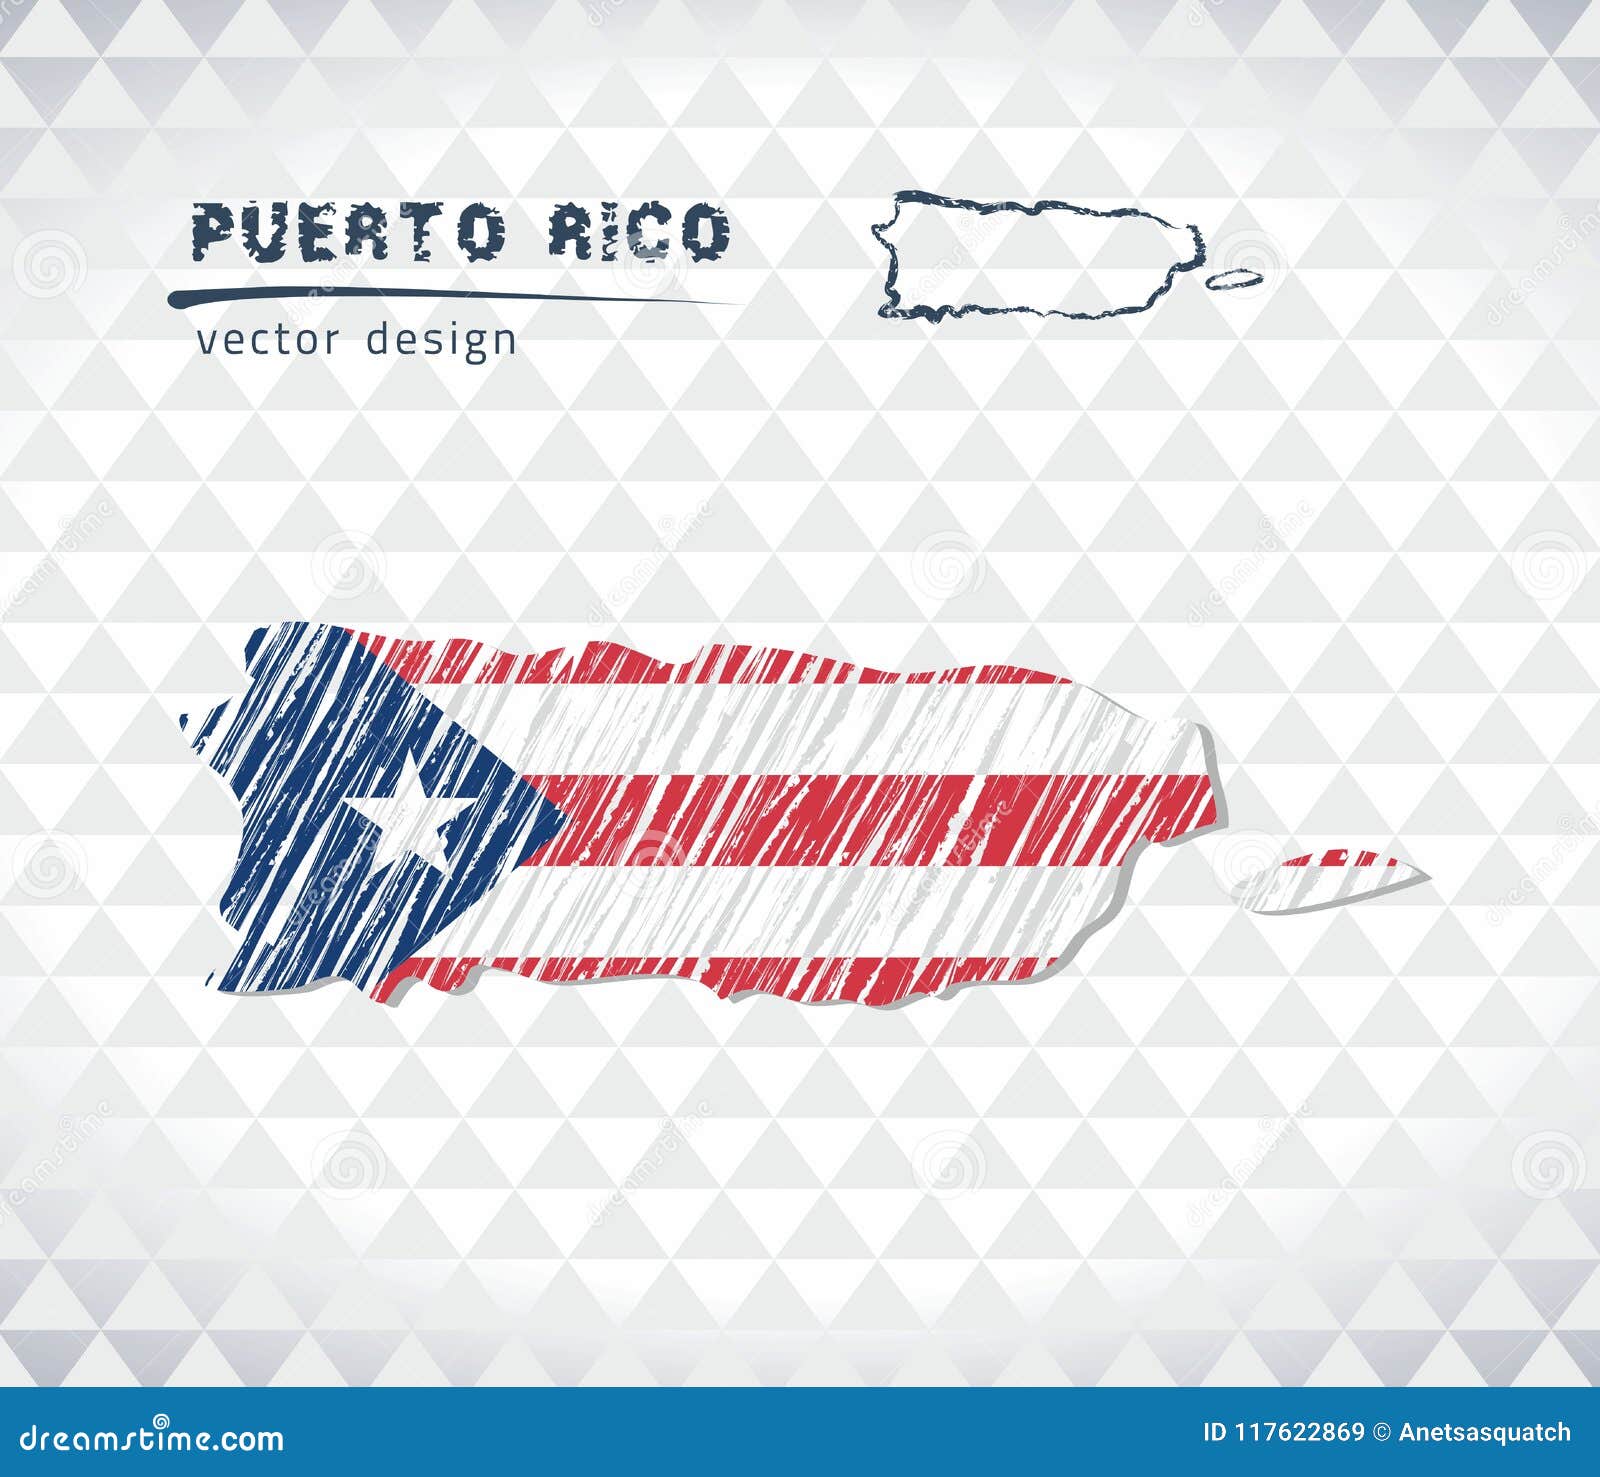 Map Of Puerto Rico With Hand Drawn Sketch Pen Map Inside Vector Illustration Stock Vector Illustration Of Outline Edge